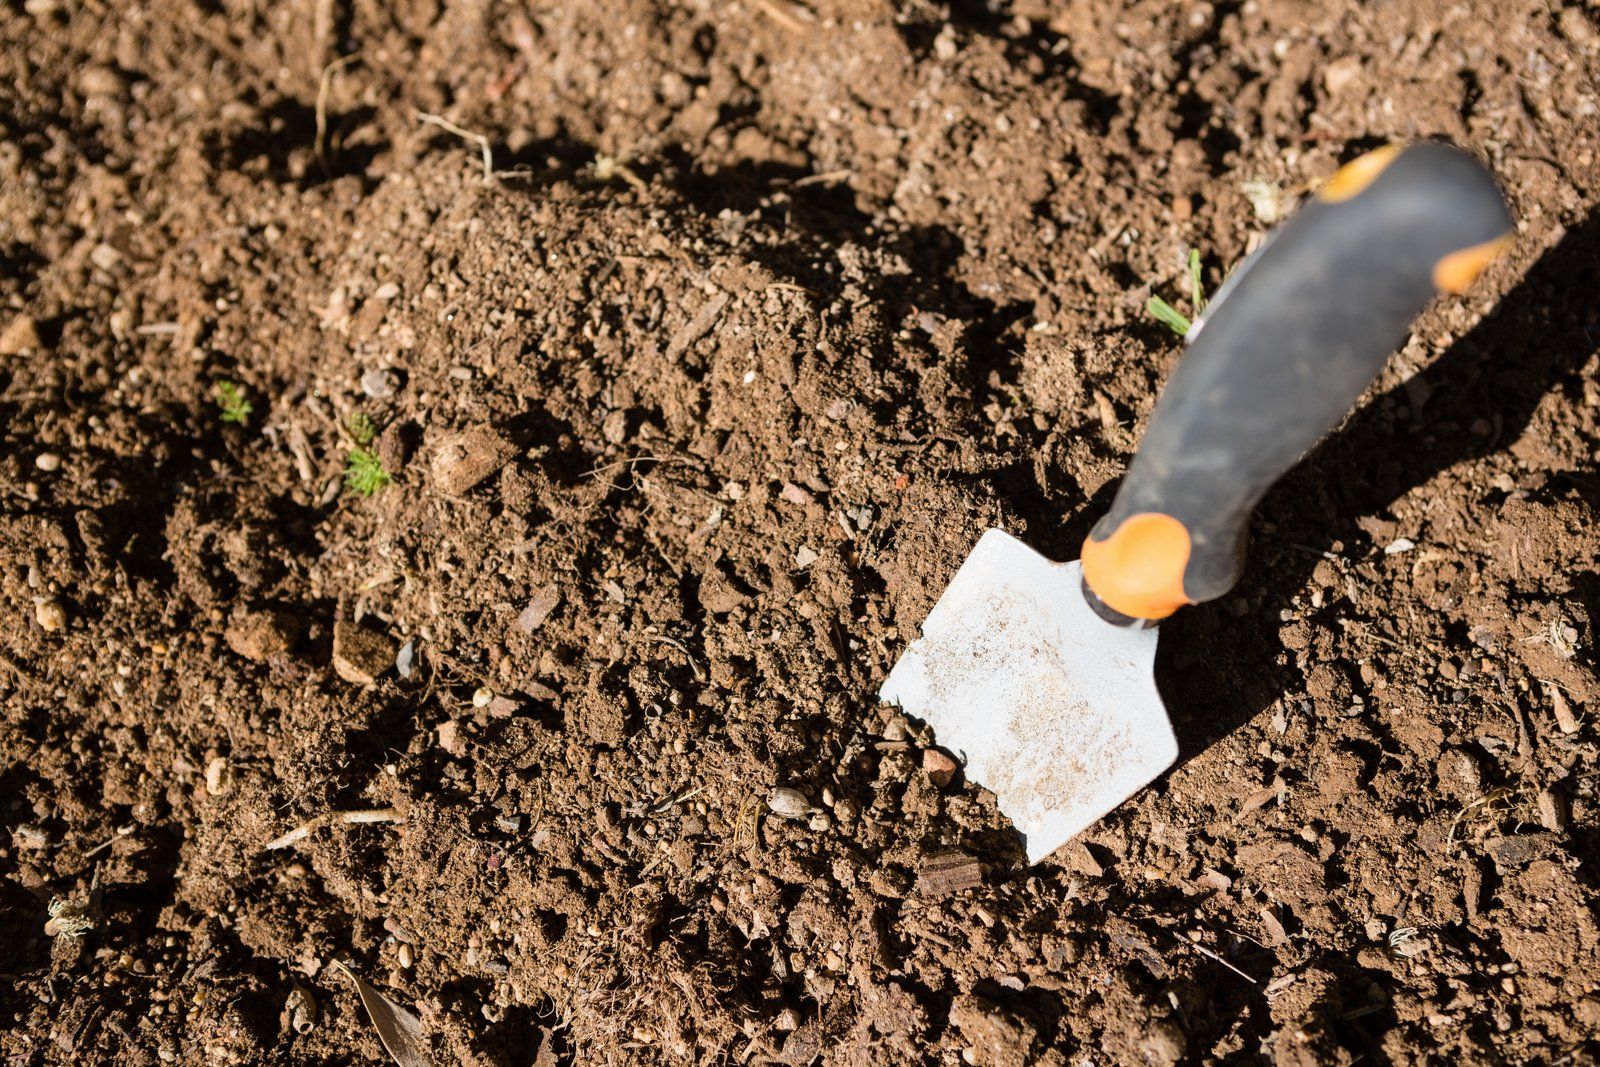 trowel in the ground